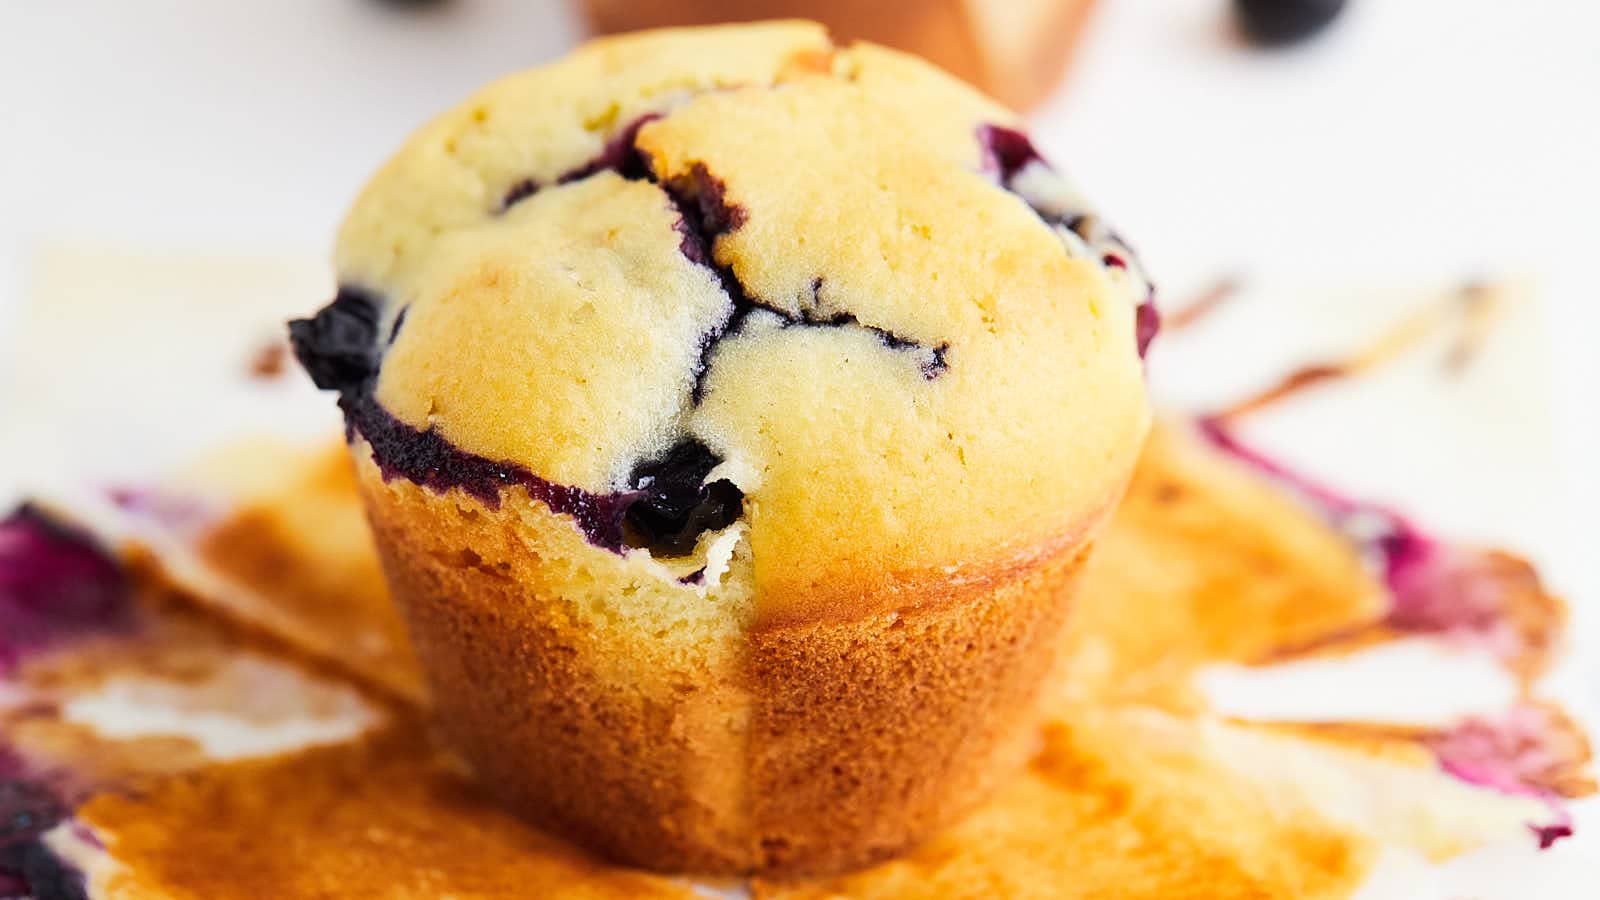 Blueberry Muffins recipes by Cheerful Cook. 